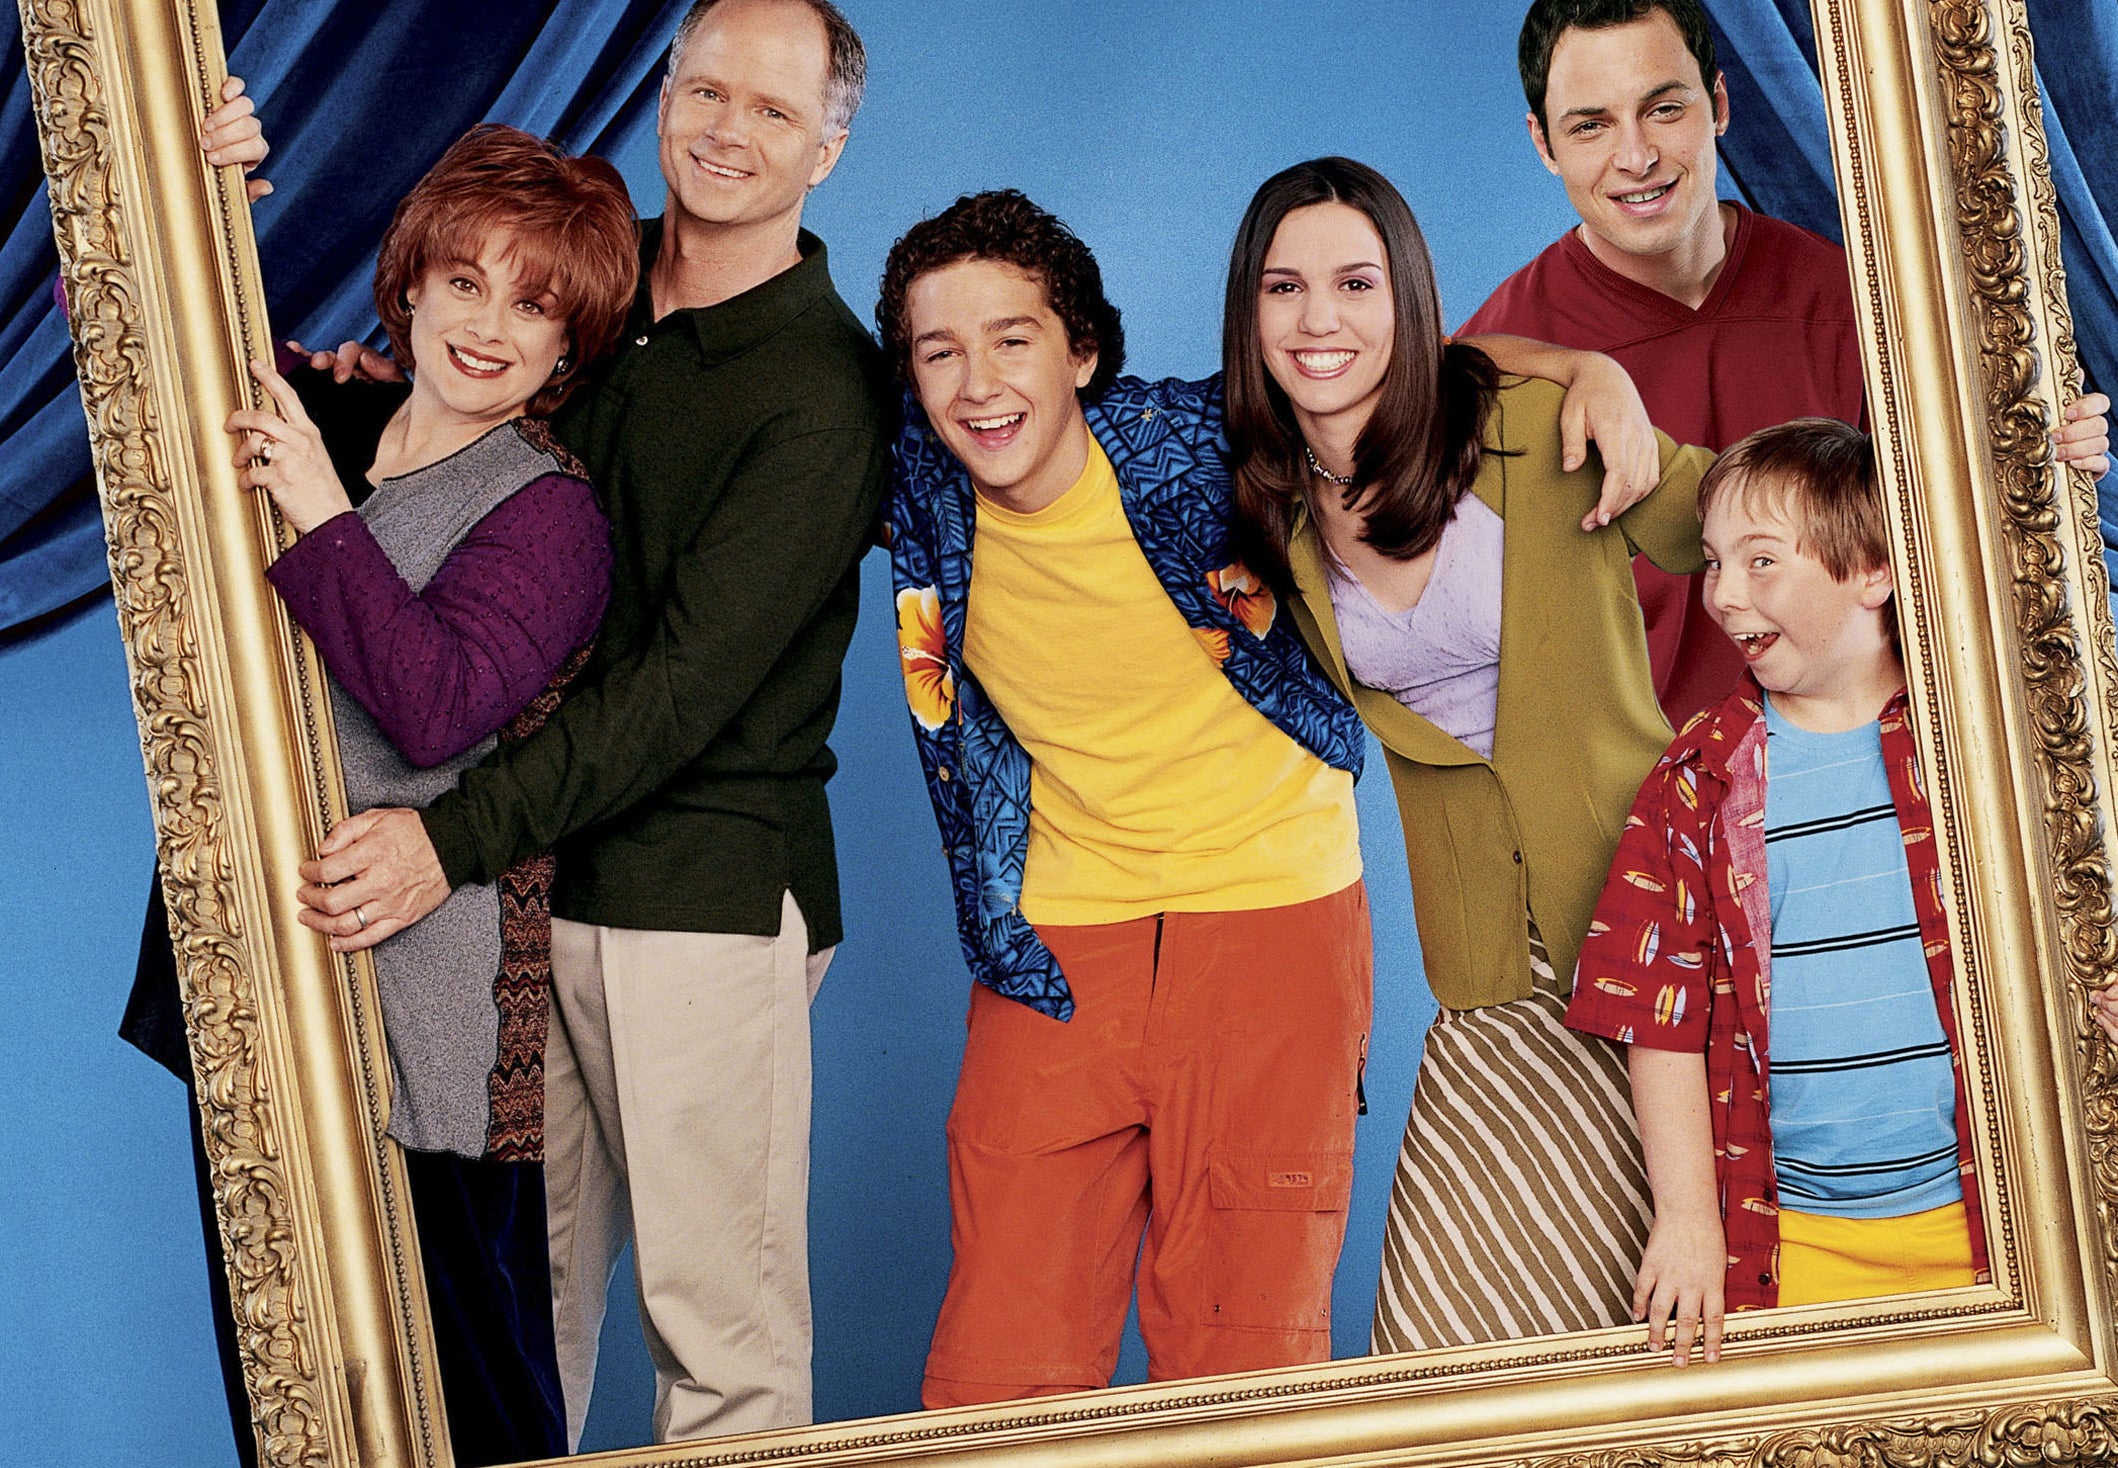 Christy poses with the Even Stevens cast in the middle of a giant frame they are holding up